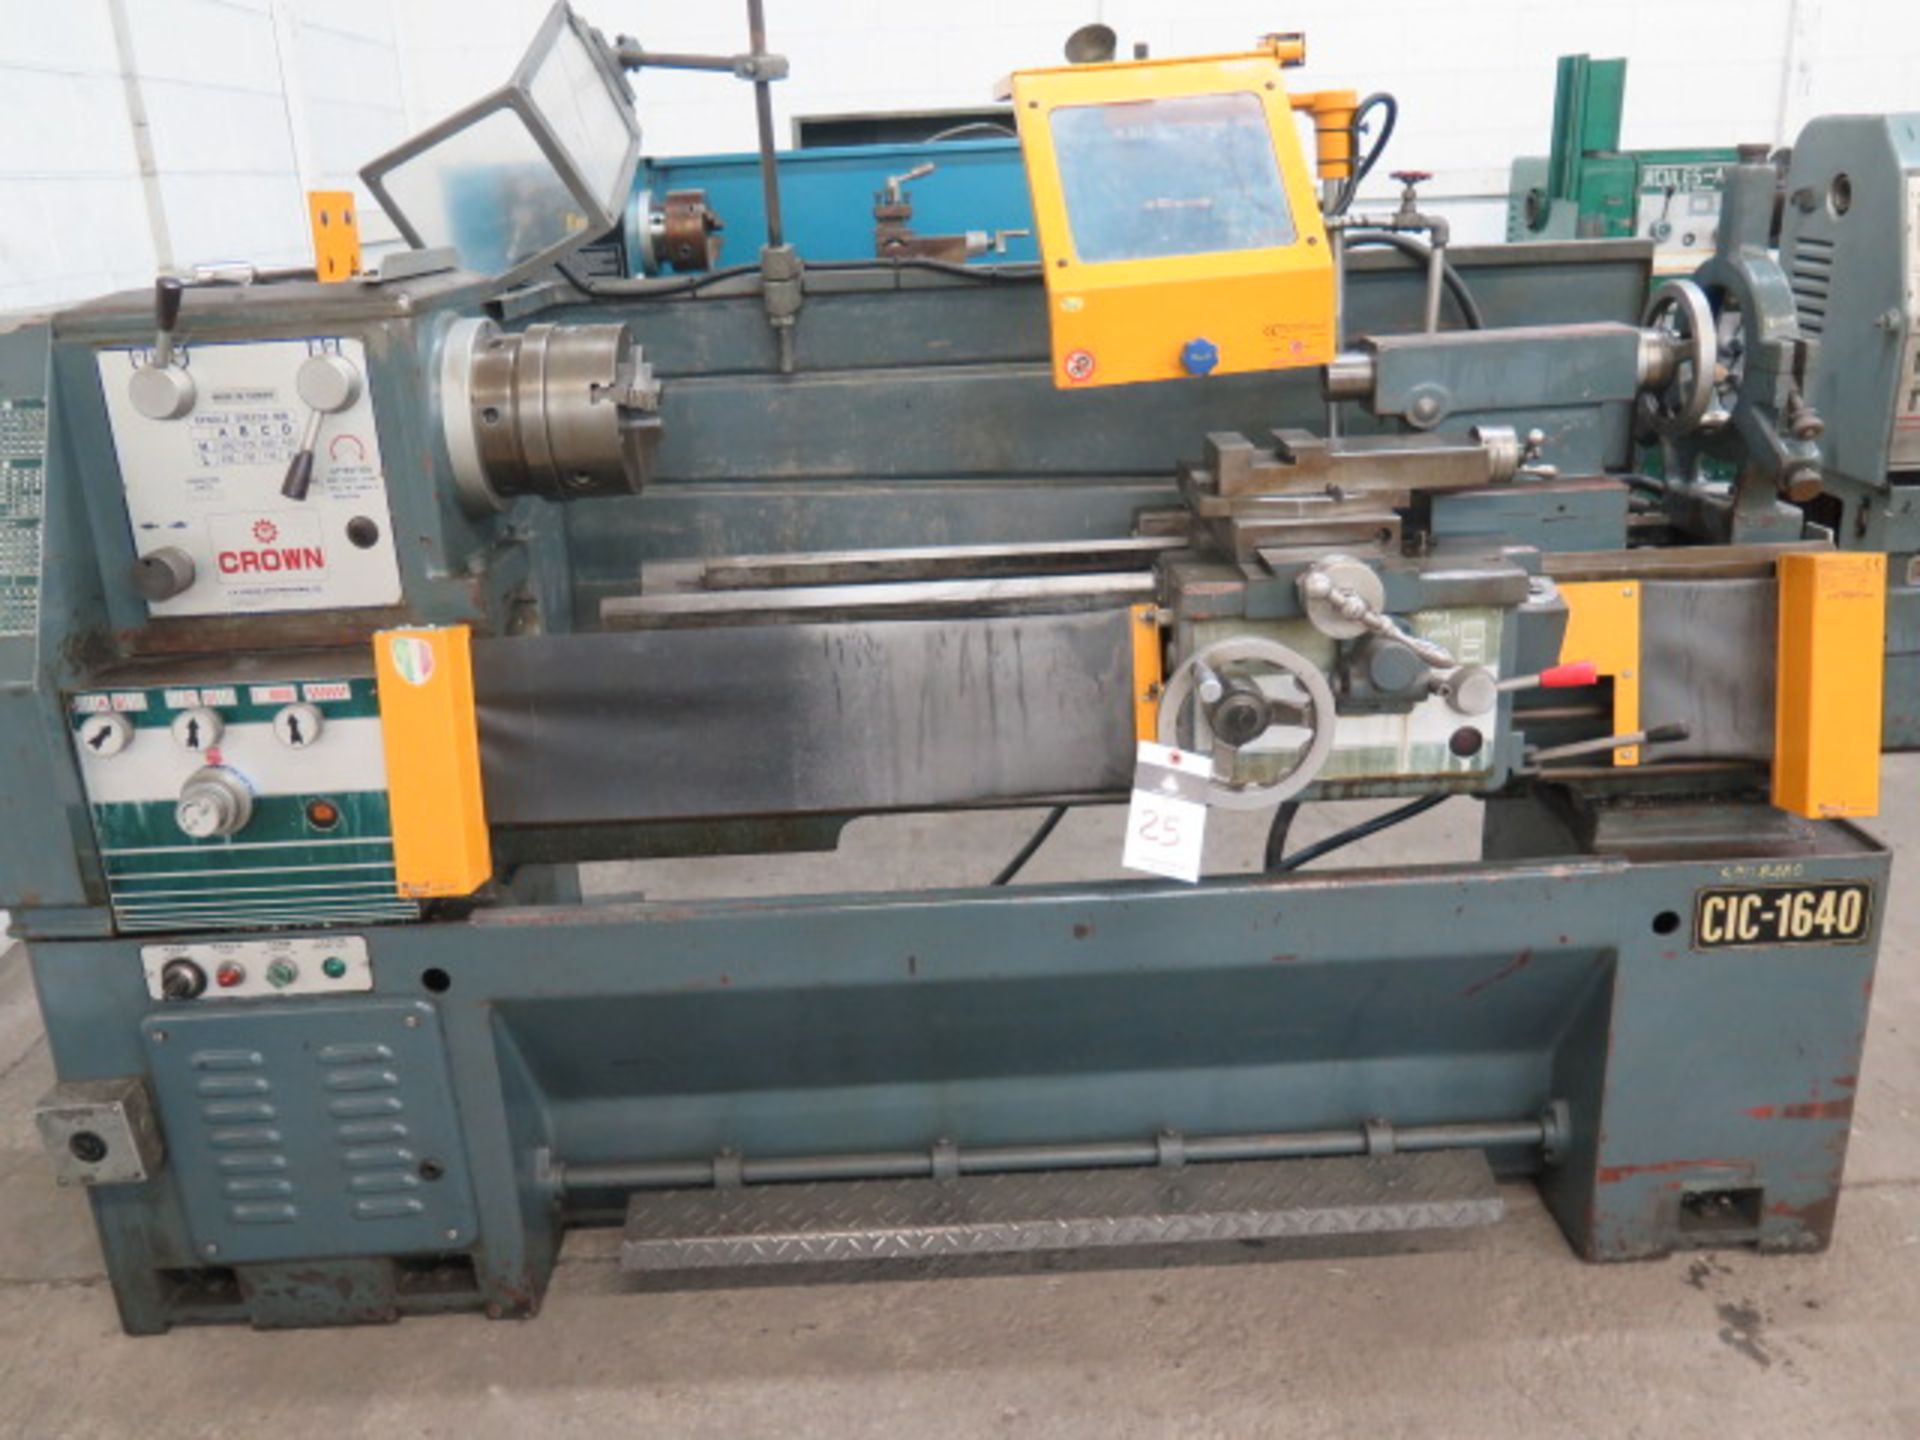 Crown CIC-1640 16” x 40” Geared Head Gap Bed Lathe w/ 85-1500 RPM, Inch/mm Threading, Tailstock,